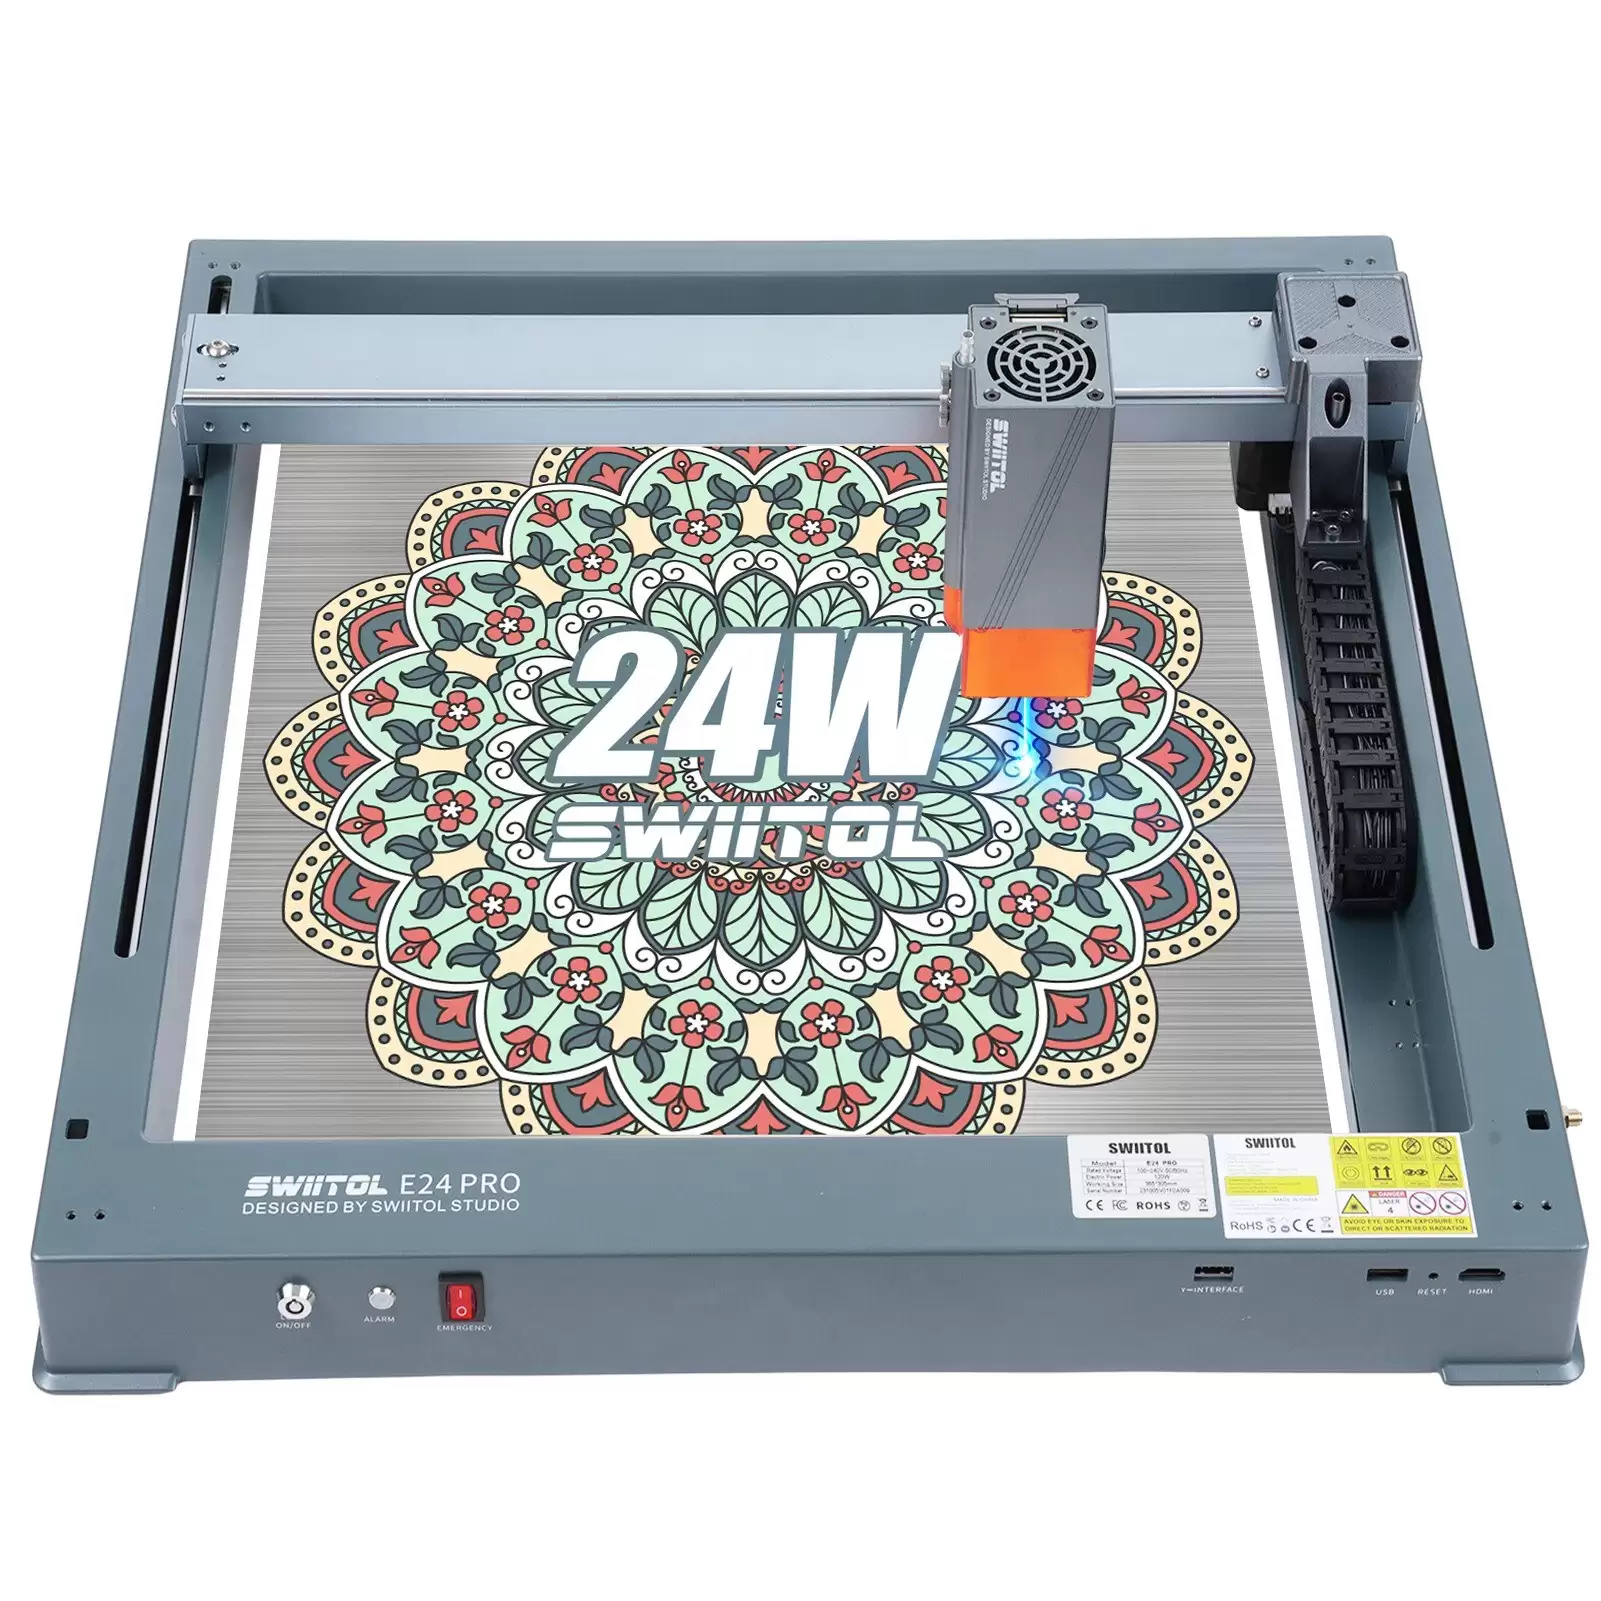 Order In Just €409 Swiitol E24 Pro 24w Integrated Structure Laser Engraver 36000mm/min High Speed With This Discount Coupon At Tomtop